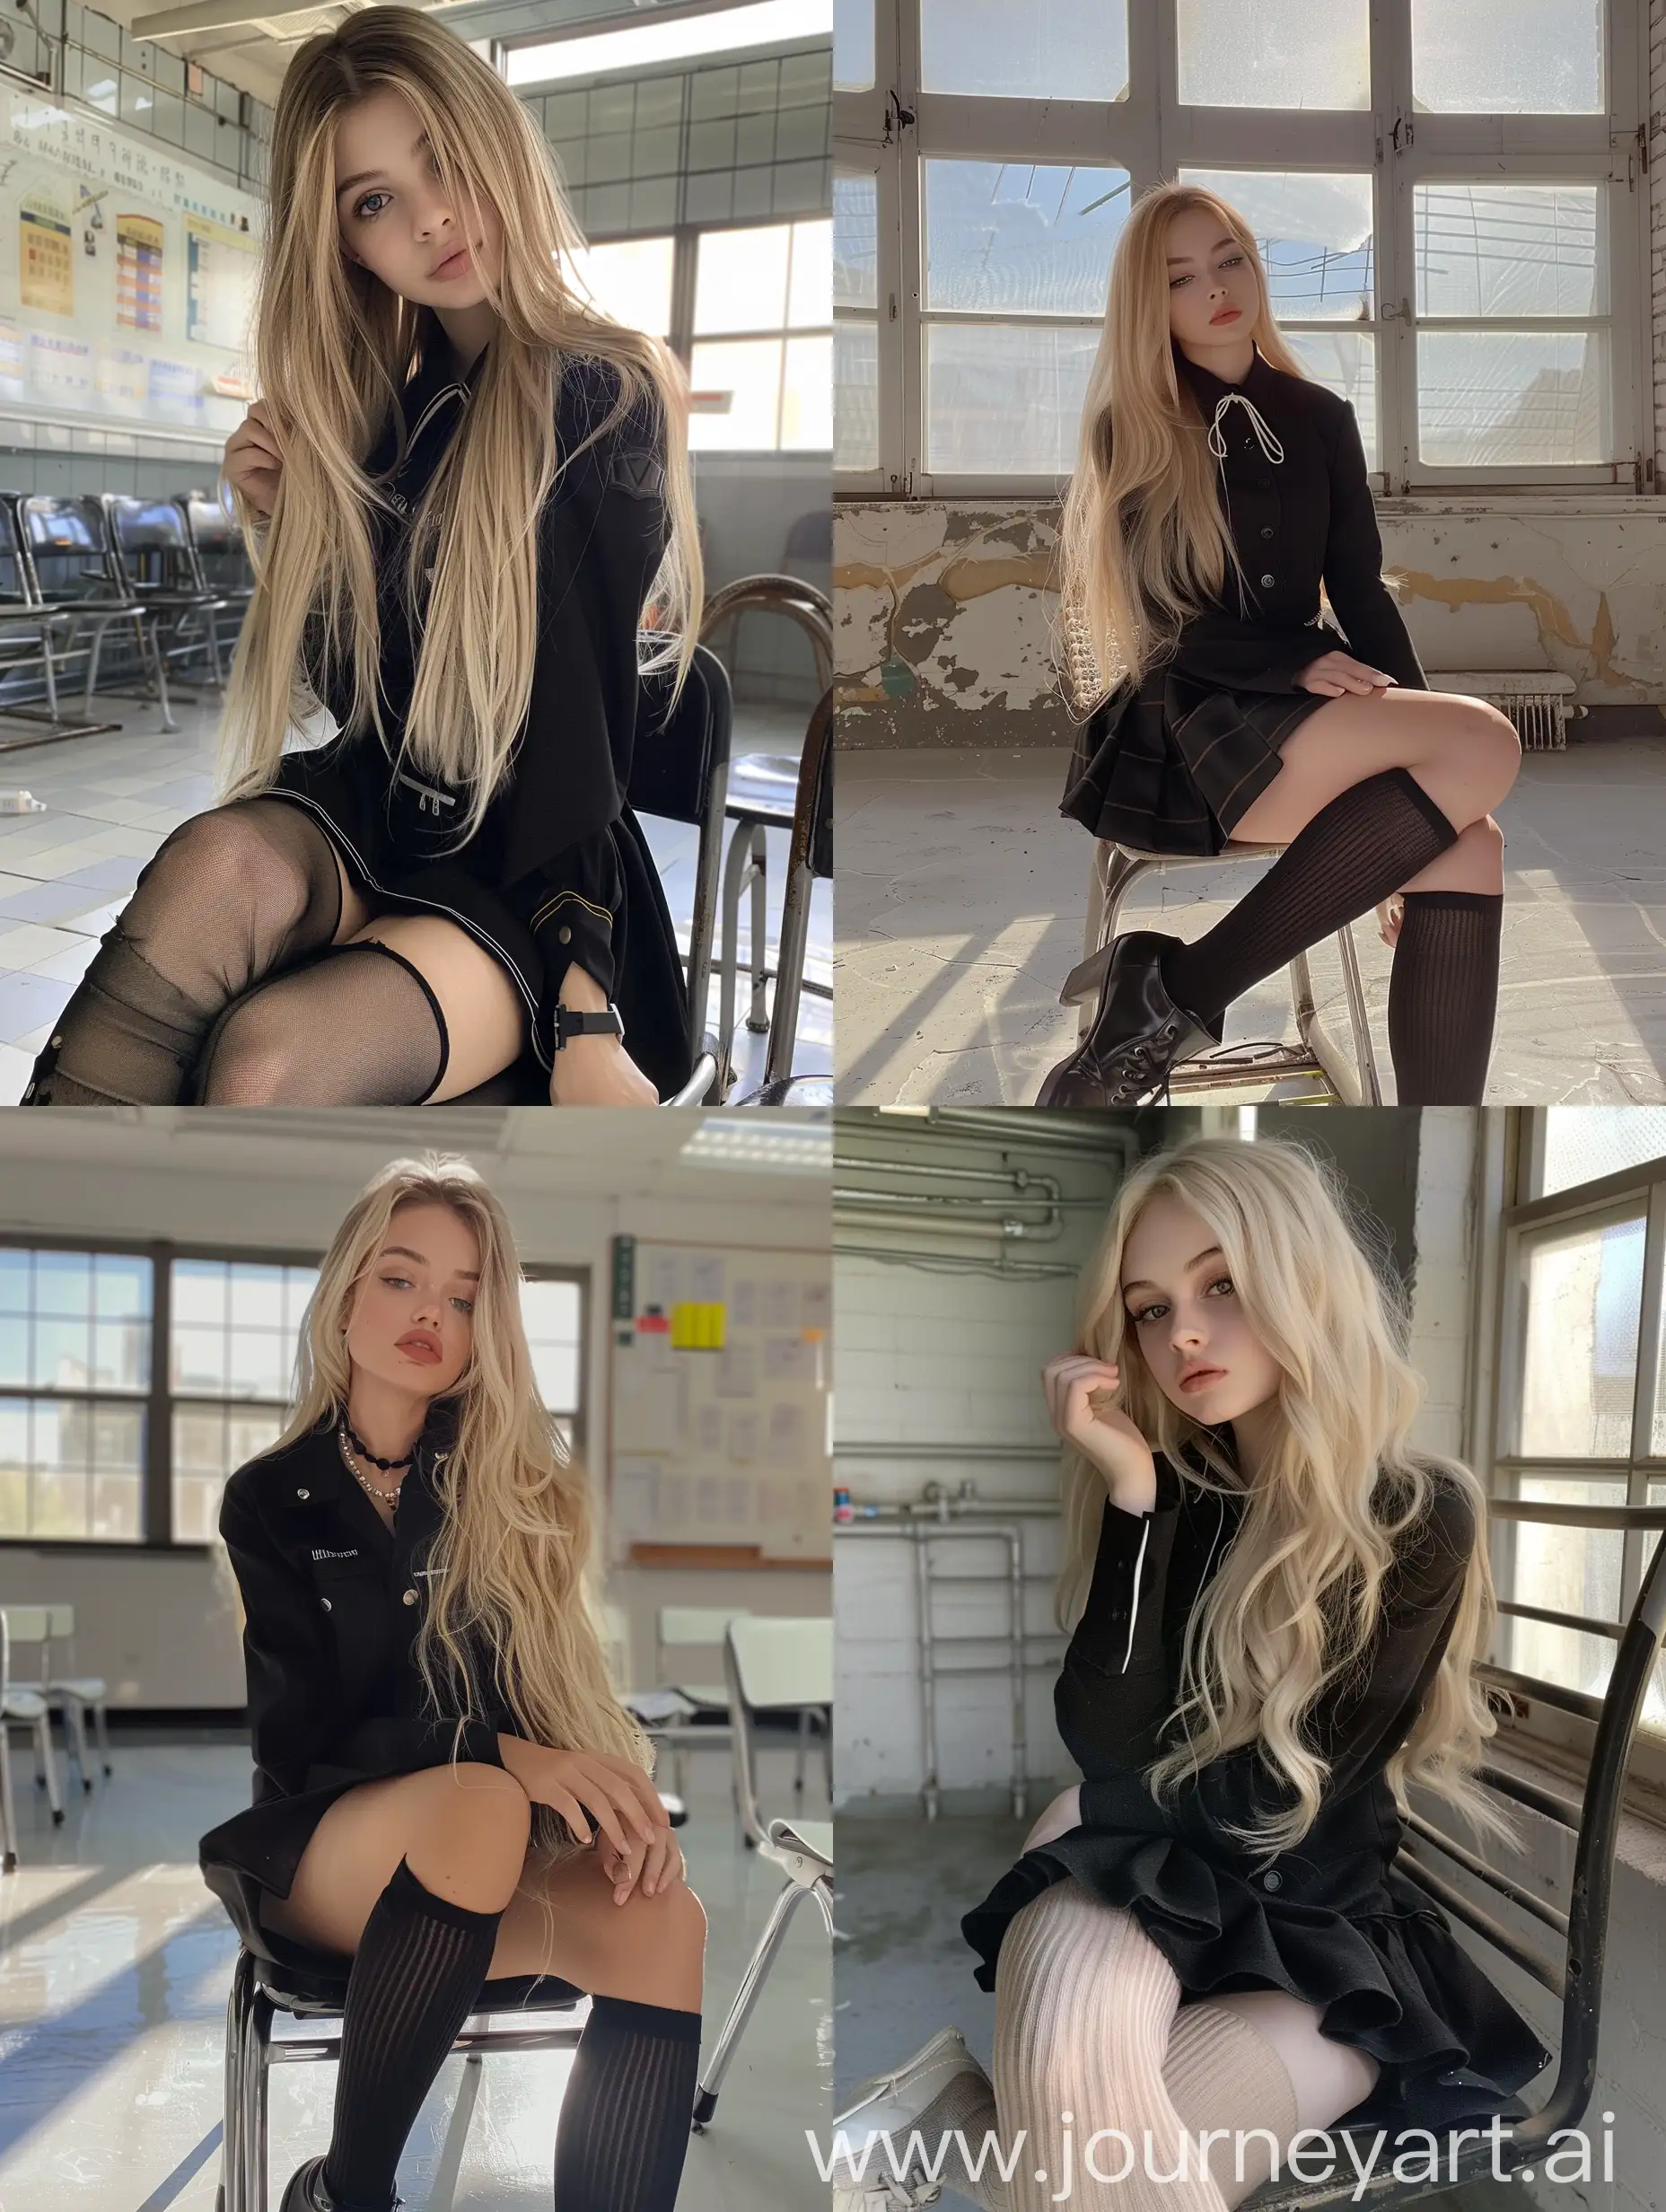 1  girl,    long  blond  hair ,   22  years  old,    influencer,    beauty   ,     in  the  school    ,school black  uniform  ,  makeup,   , chão view,      sitting  on  chair  ,    socks  and  boots,    no  effect,     selfie   , iphone  selfie,      no  filters ,   iphone  photo    natural